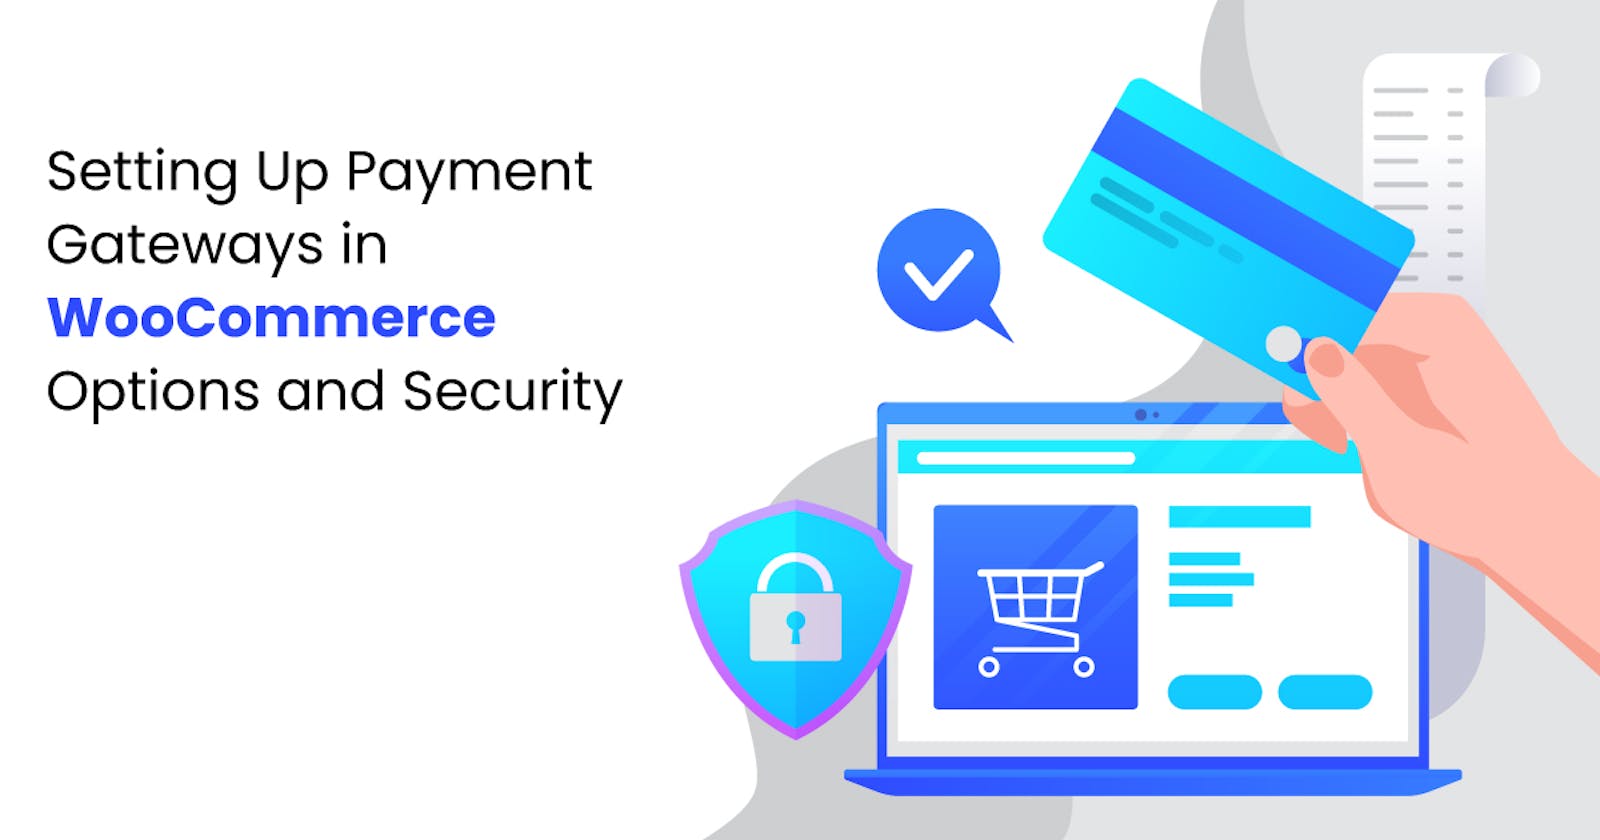 Setting Up Payment Gateways in WooCommerce: Options and Security